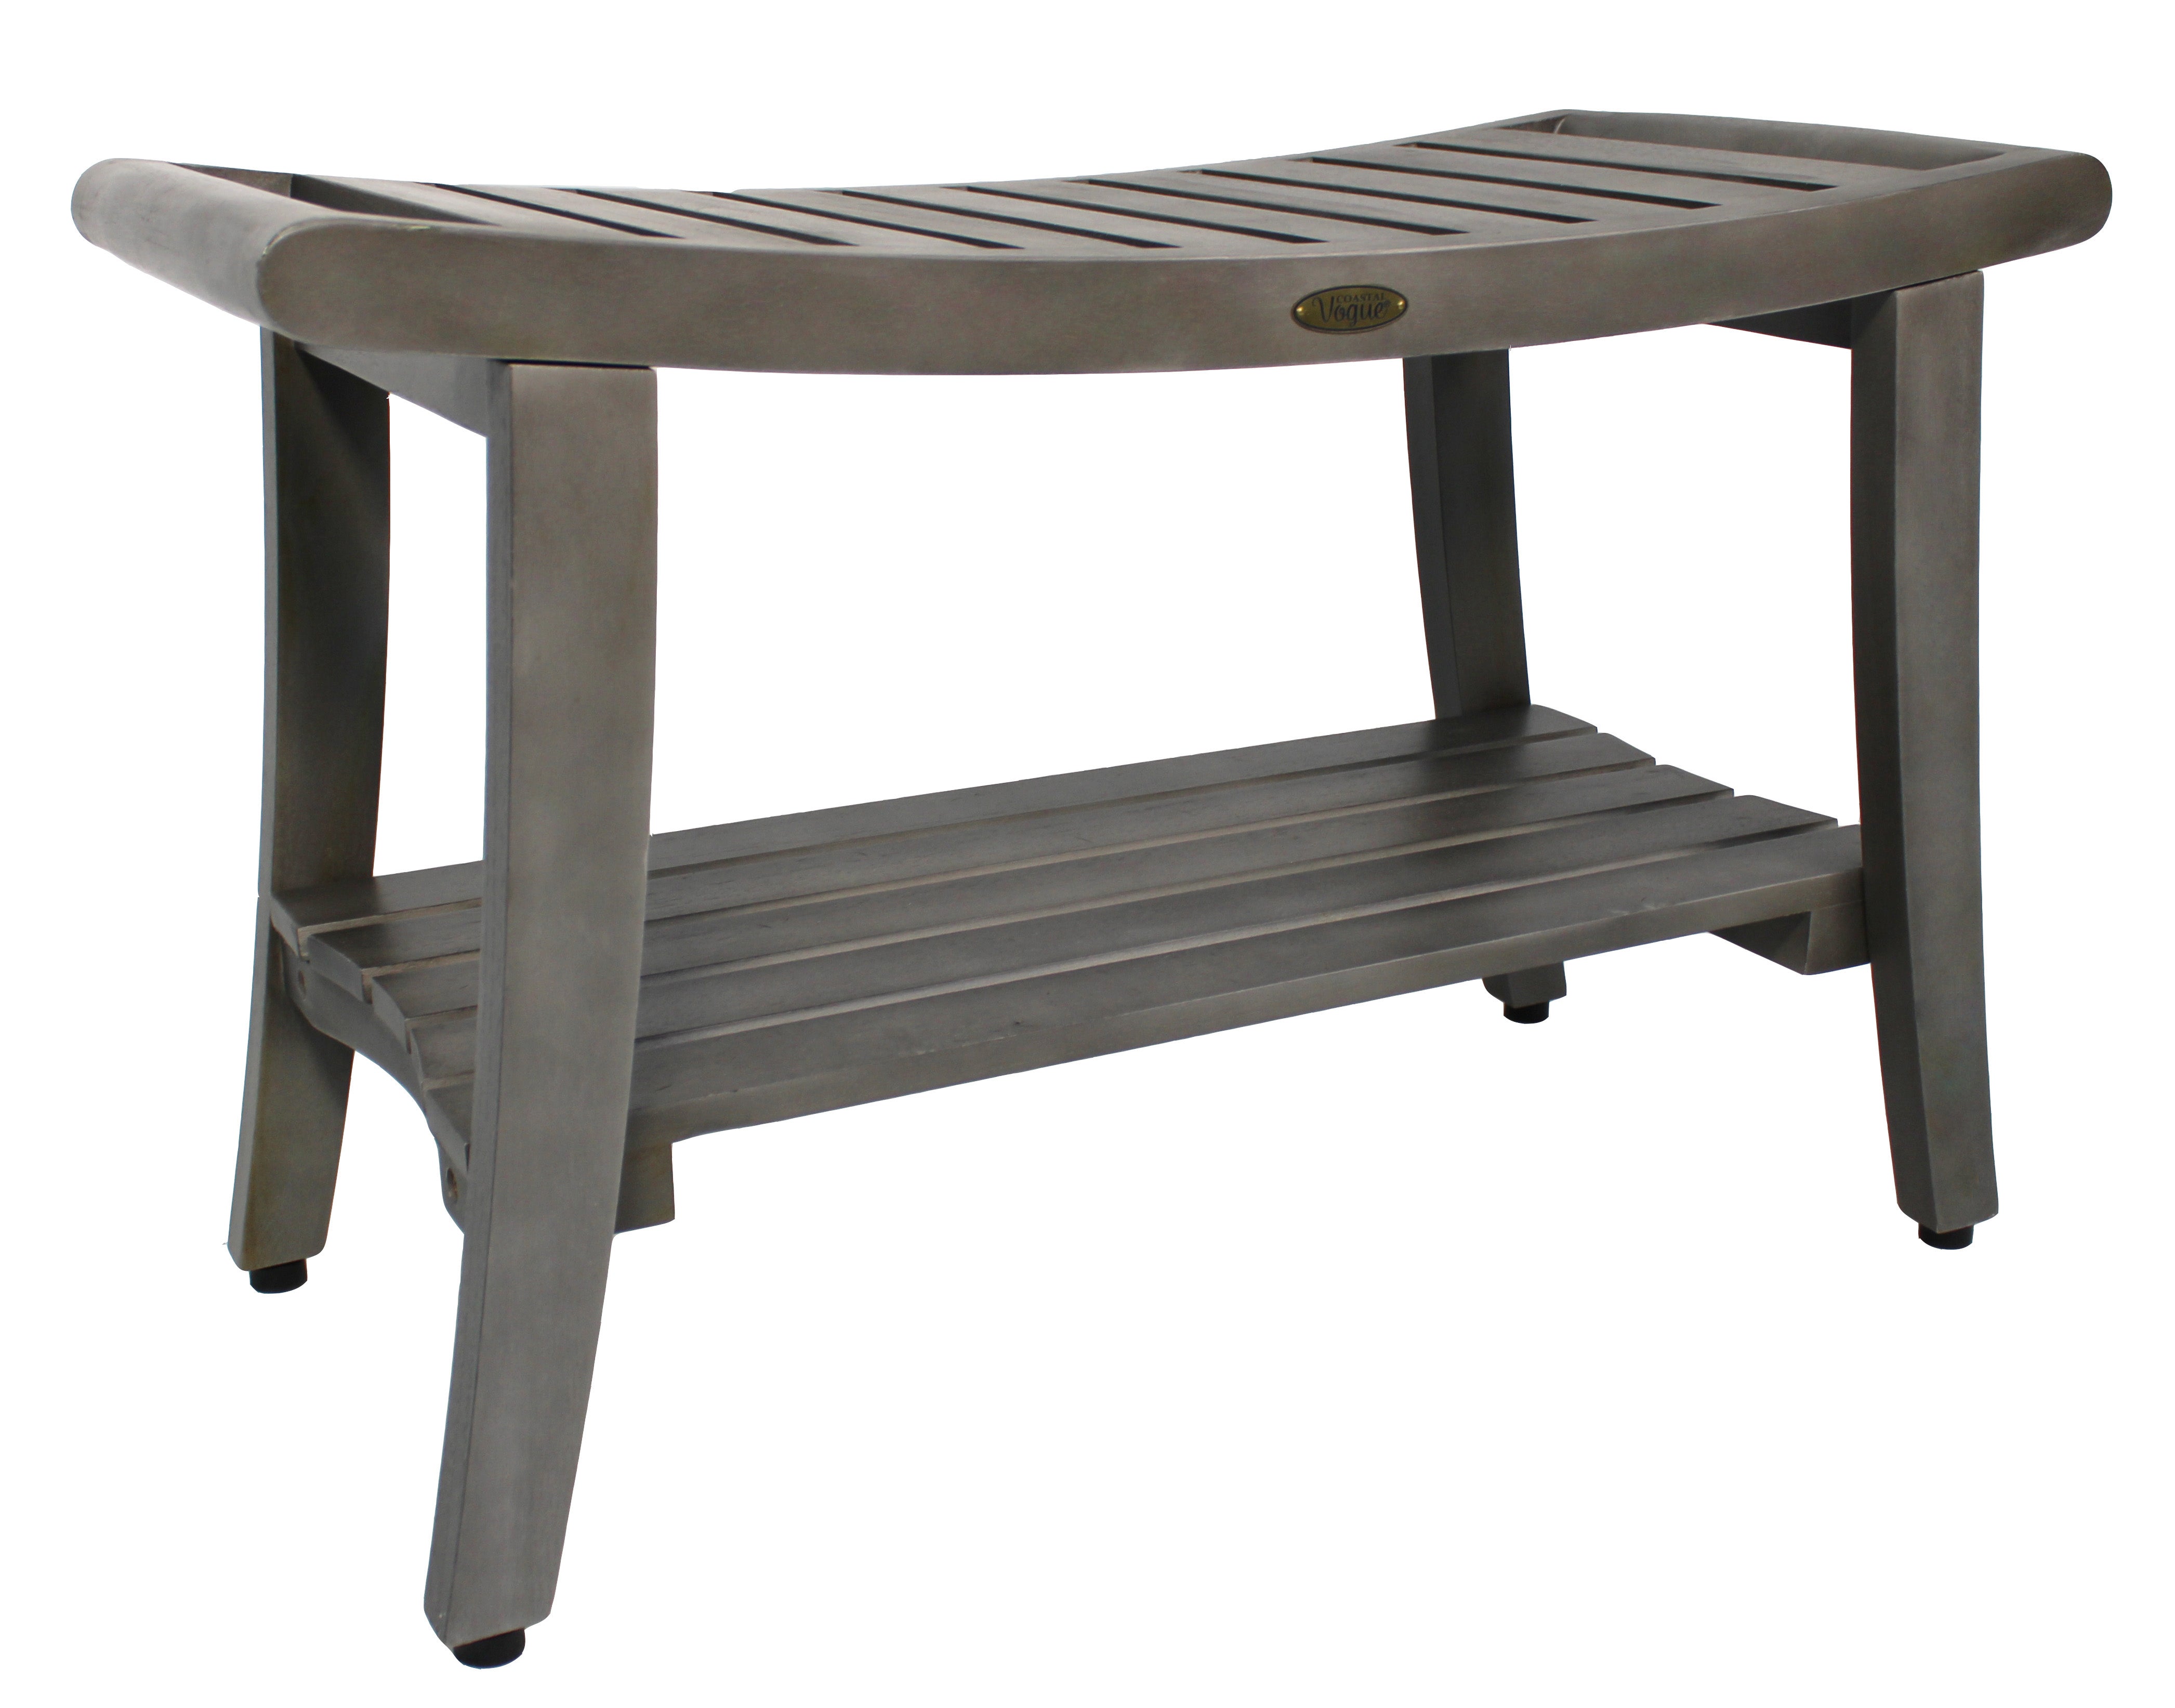 CoastalVogue® Harmony® 30" Teak Wood Shower Bench with Shelf and LiftAide® Arms in Antique Gray Finish